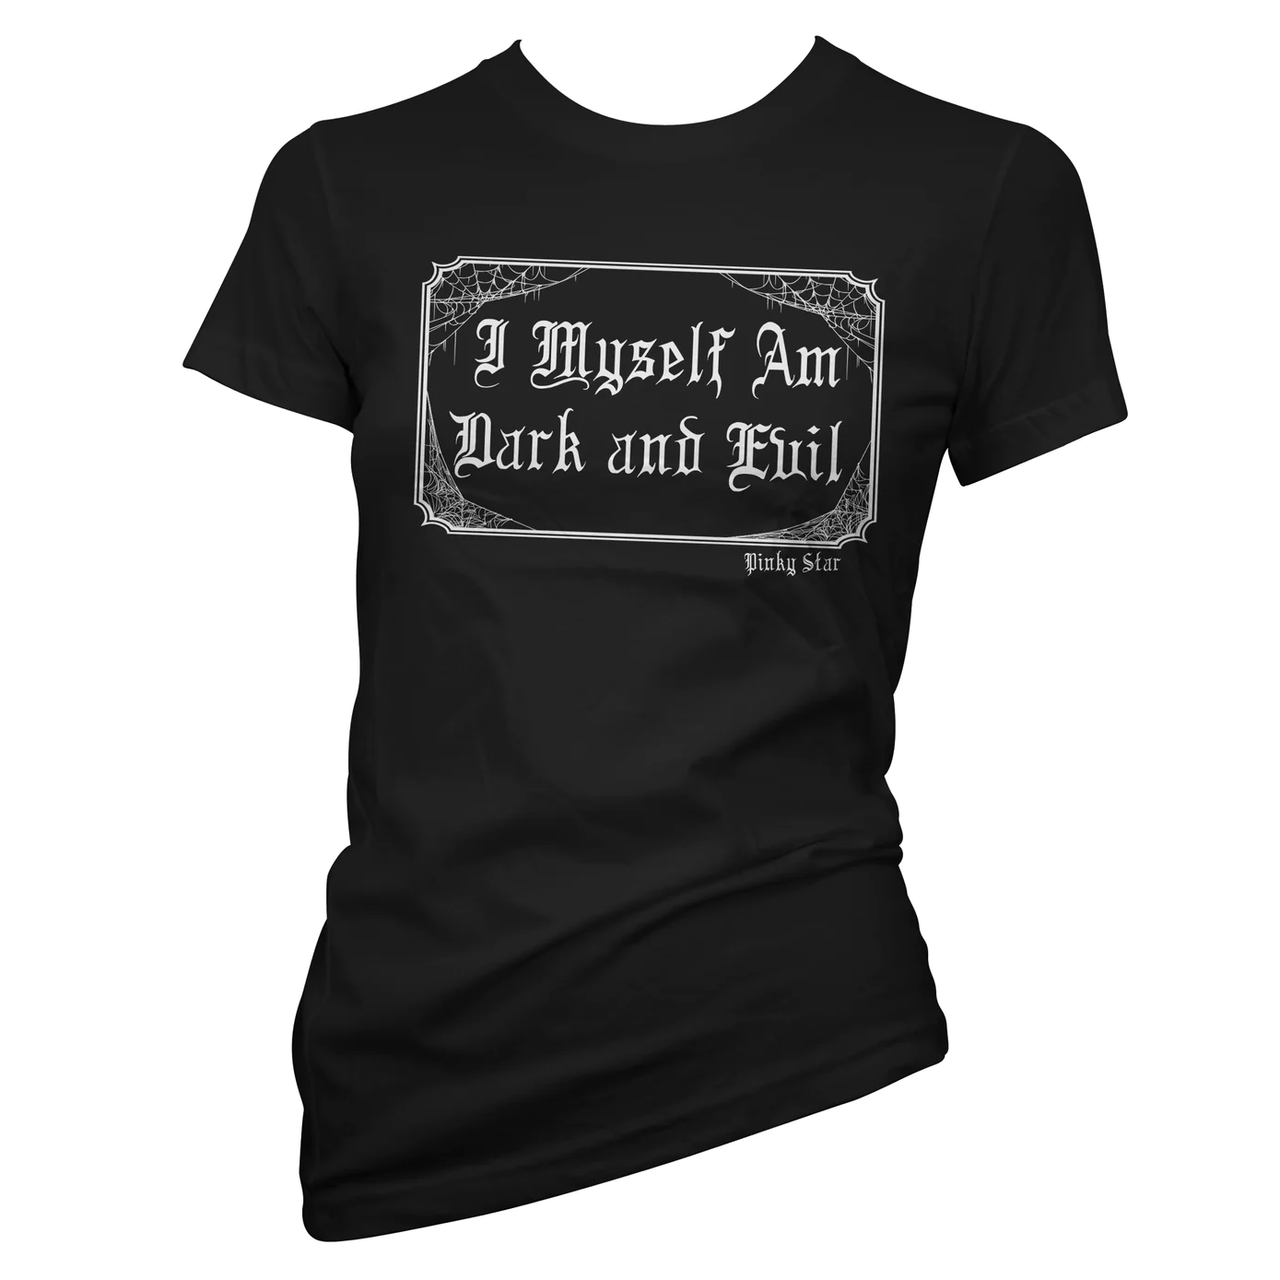 PINKY STAR DARK AND EVIL FITTED TEE